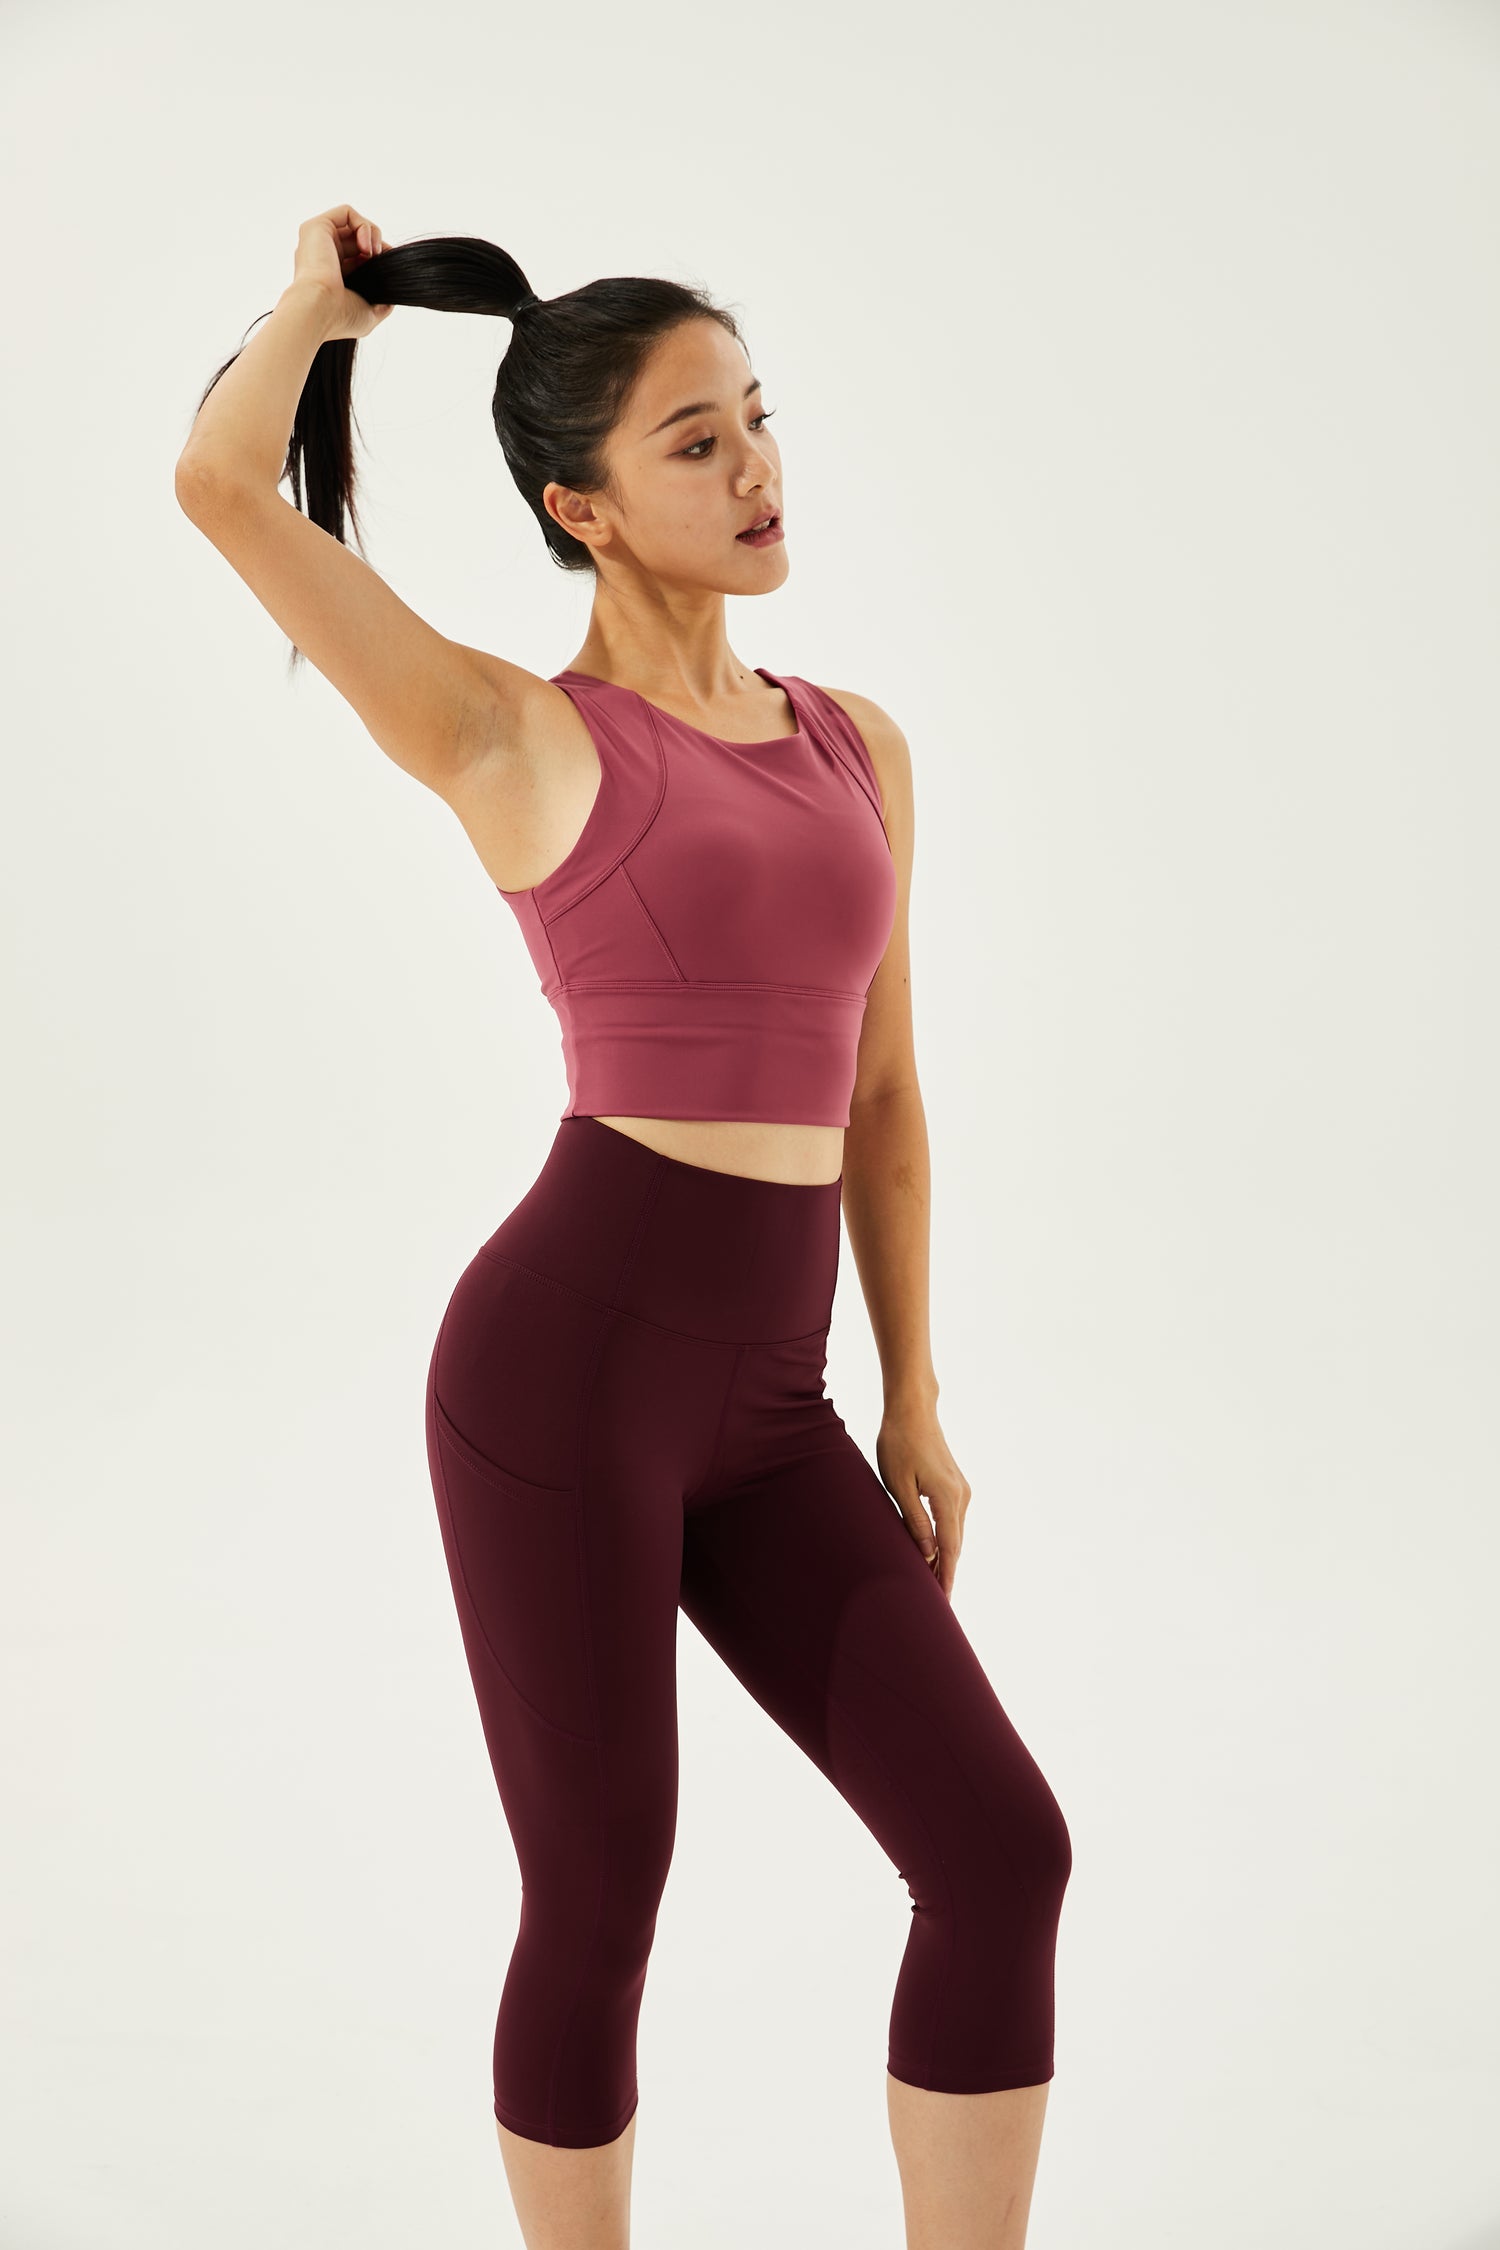 High-Waist 7/8 Buttery Soft & Cooling Camel-Toe Proof Courage Leggings With 3 Pockets